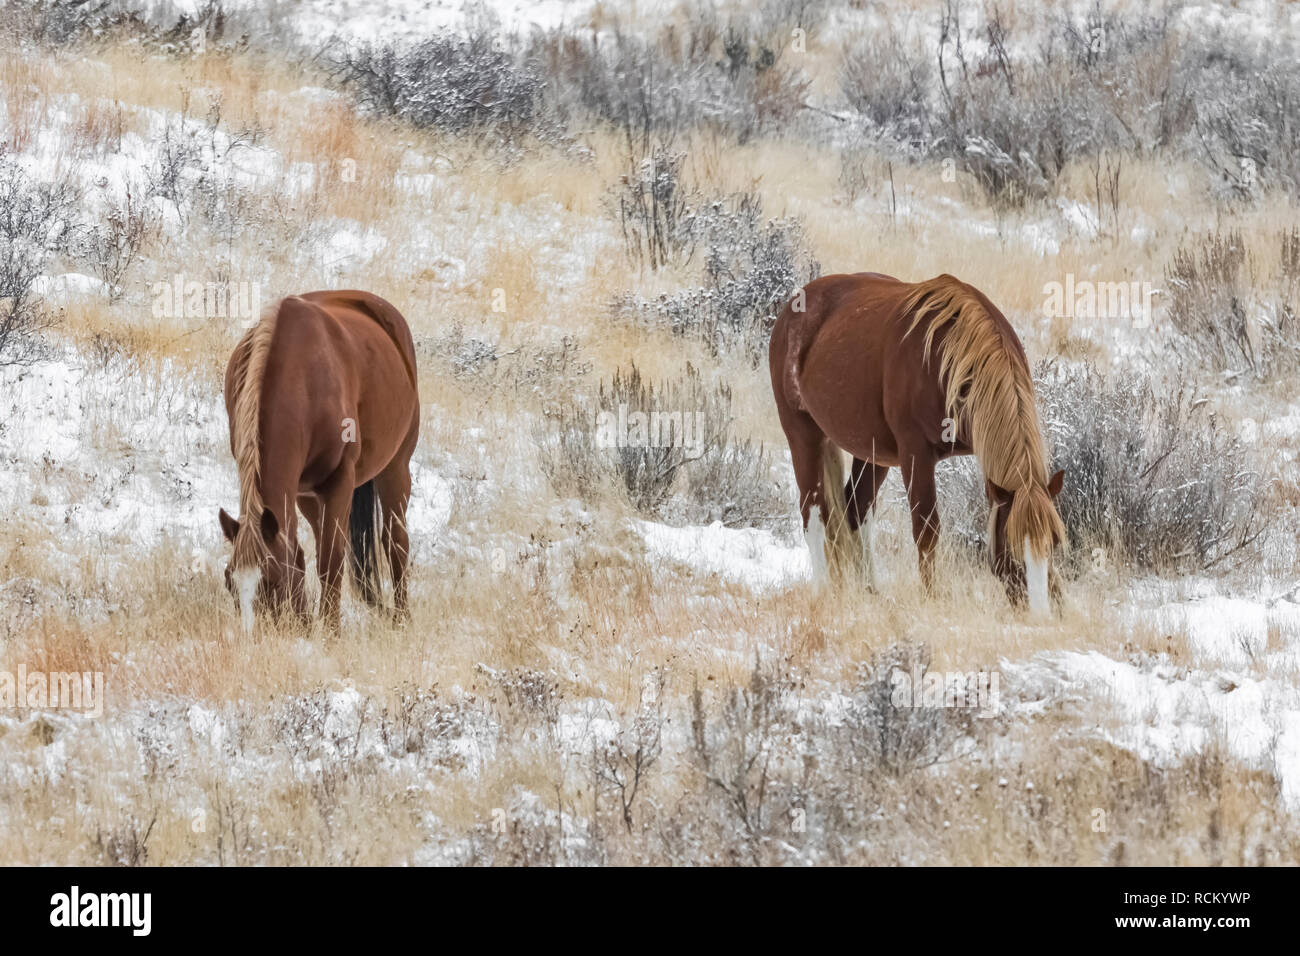 Wild Horses, Equus caballus, grazing in a snowy November grassland in the South Unit of Theodore Roosevelt National Park, North Dakota, USA Stock Photo